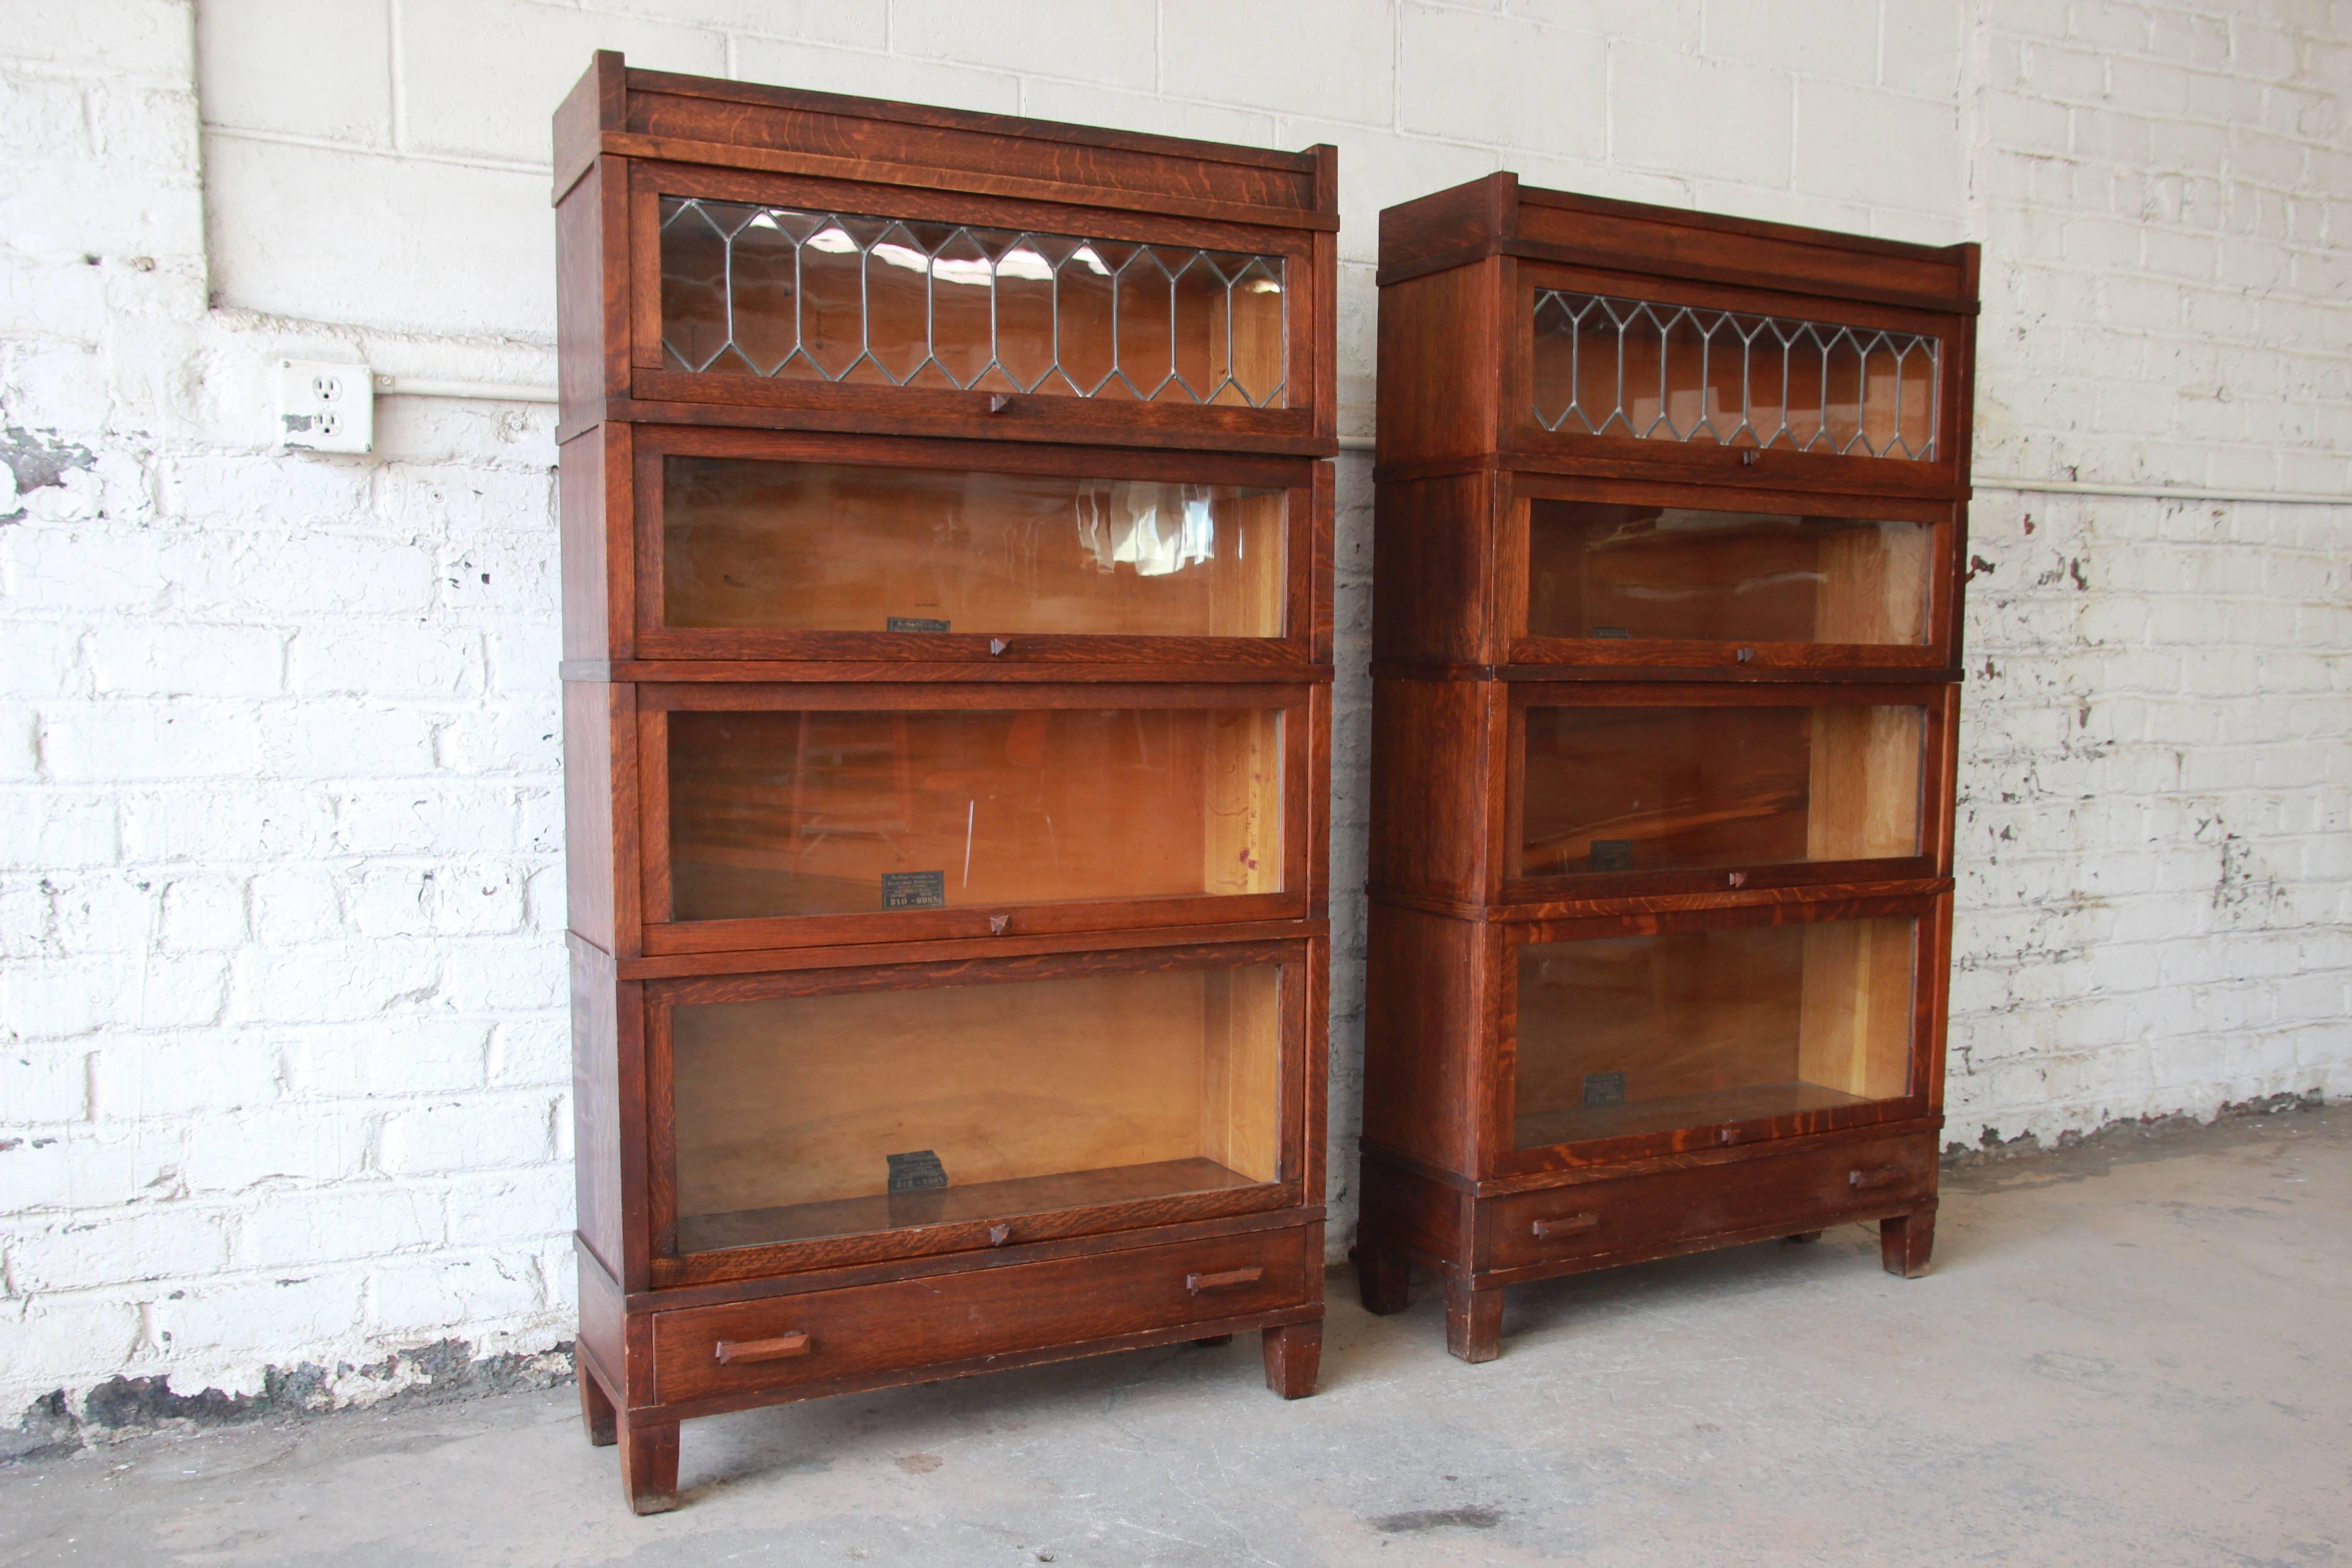 globe wernicke bookcase with leaded glass